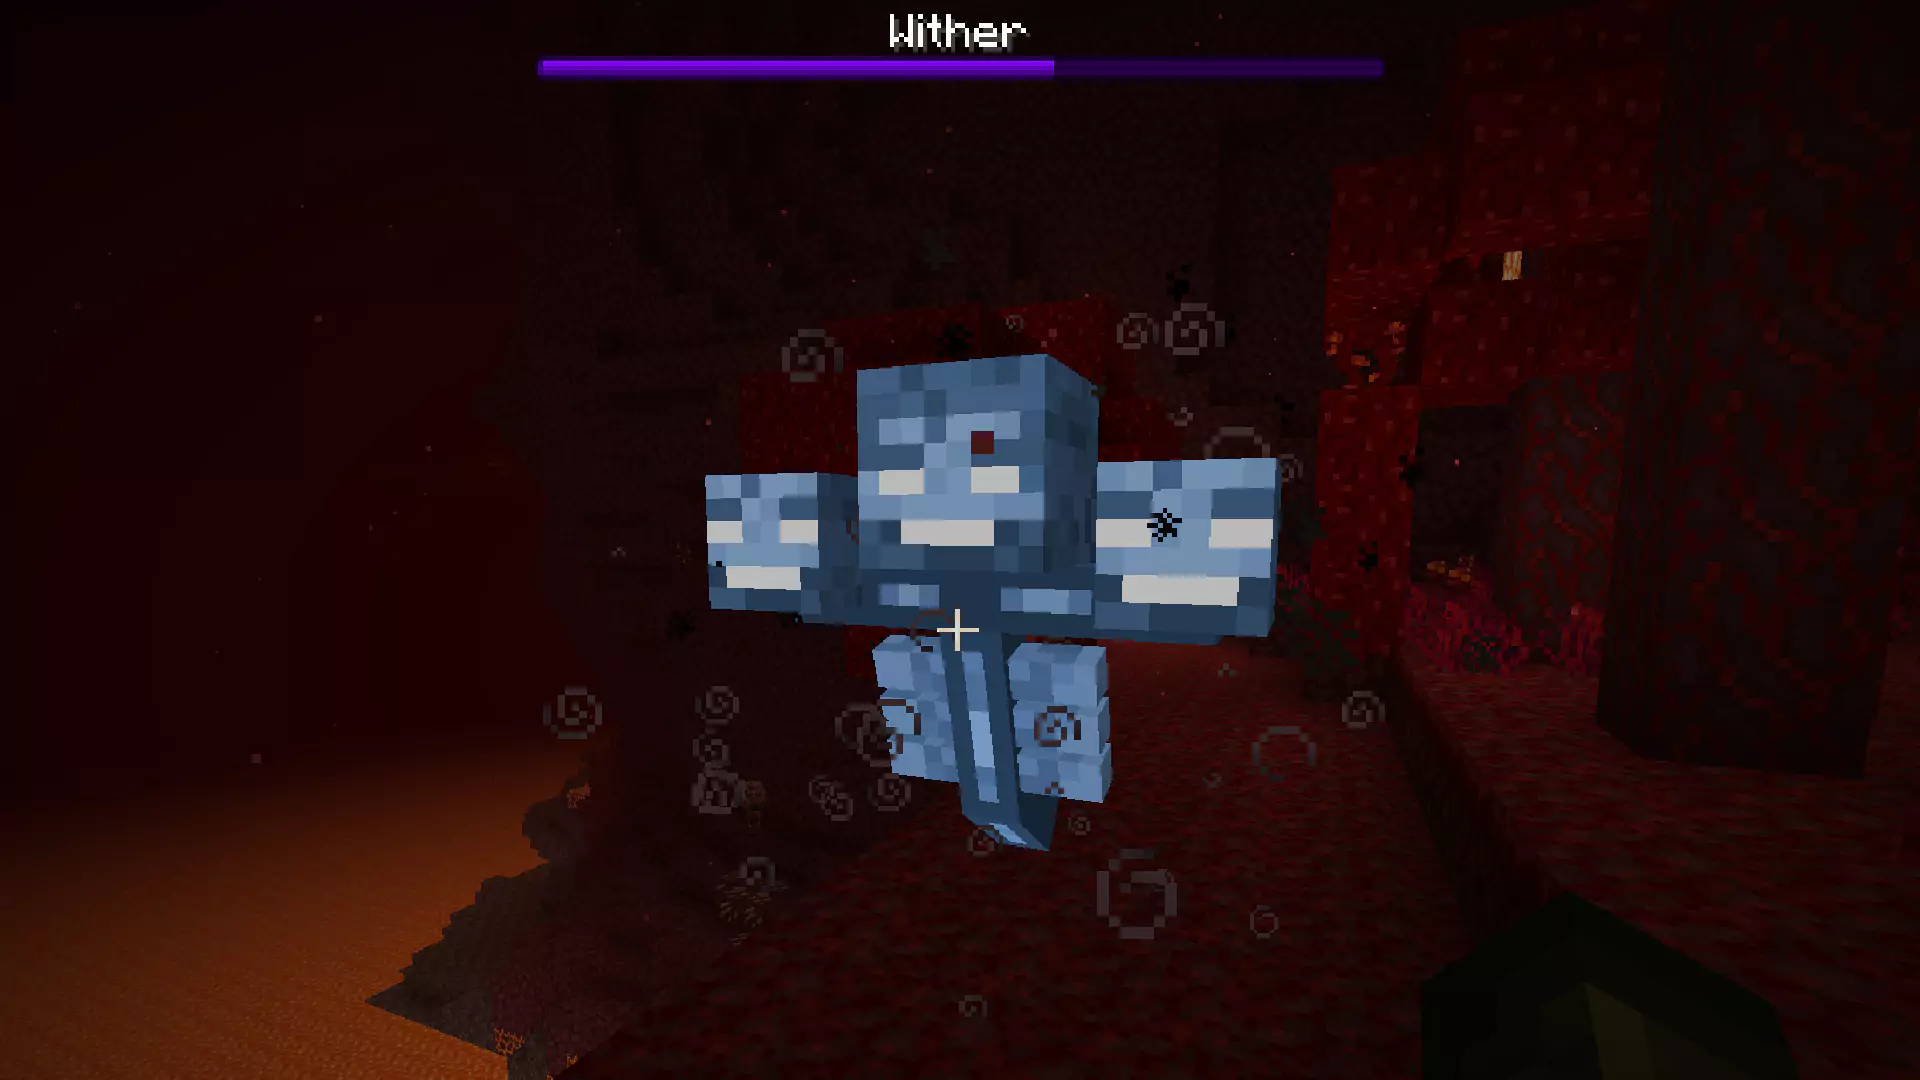 The Wither being spawned in Minecraft.